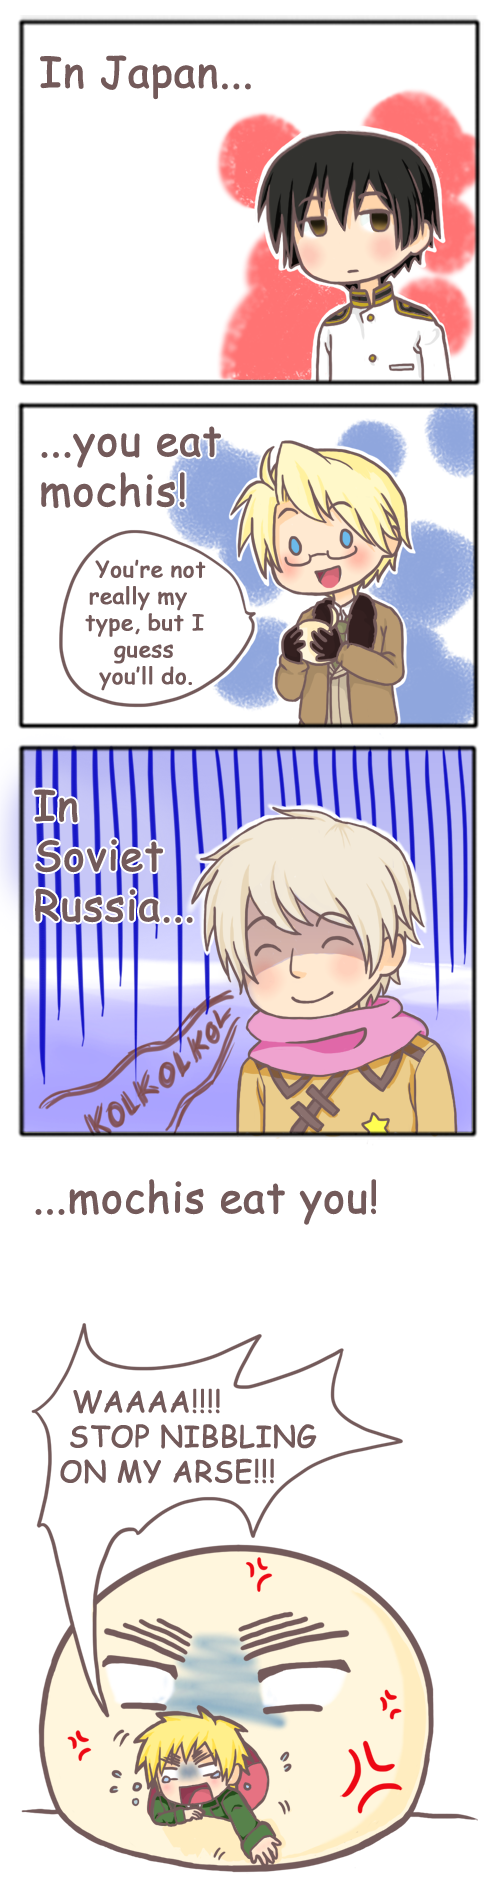 APH-In Soviet Russia...